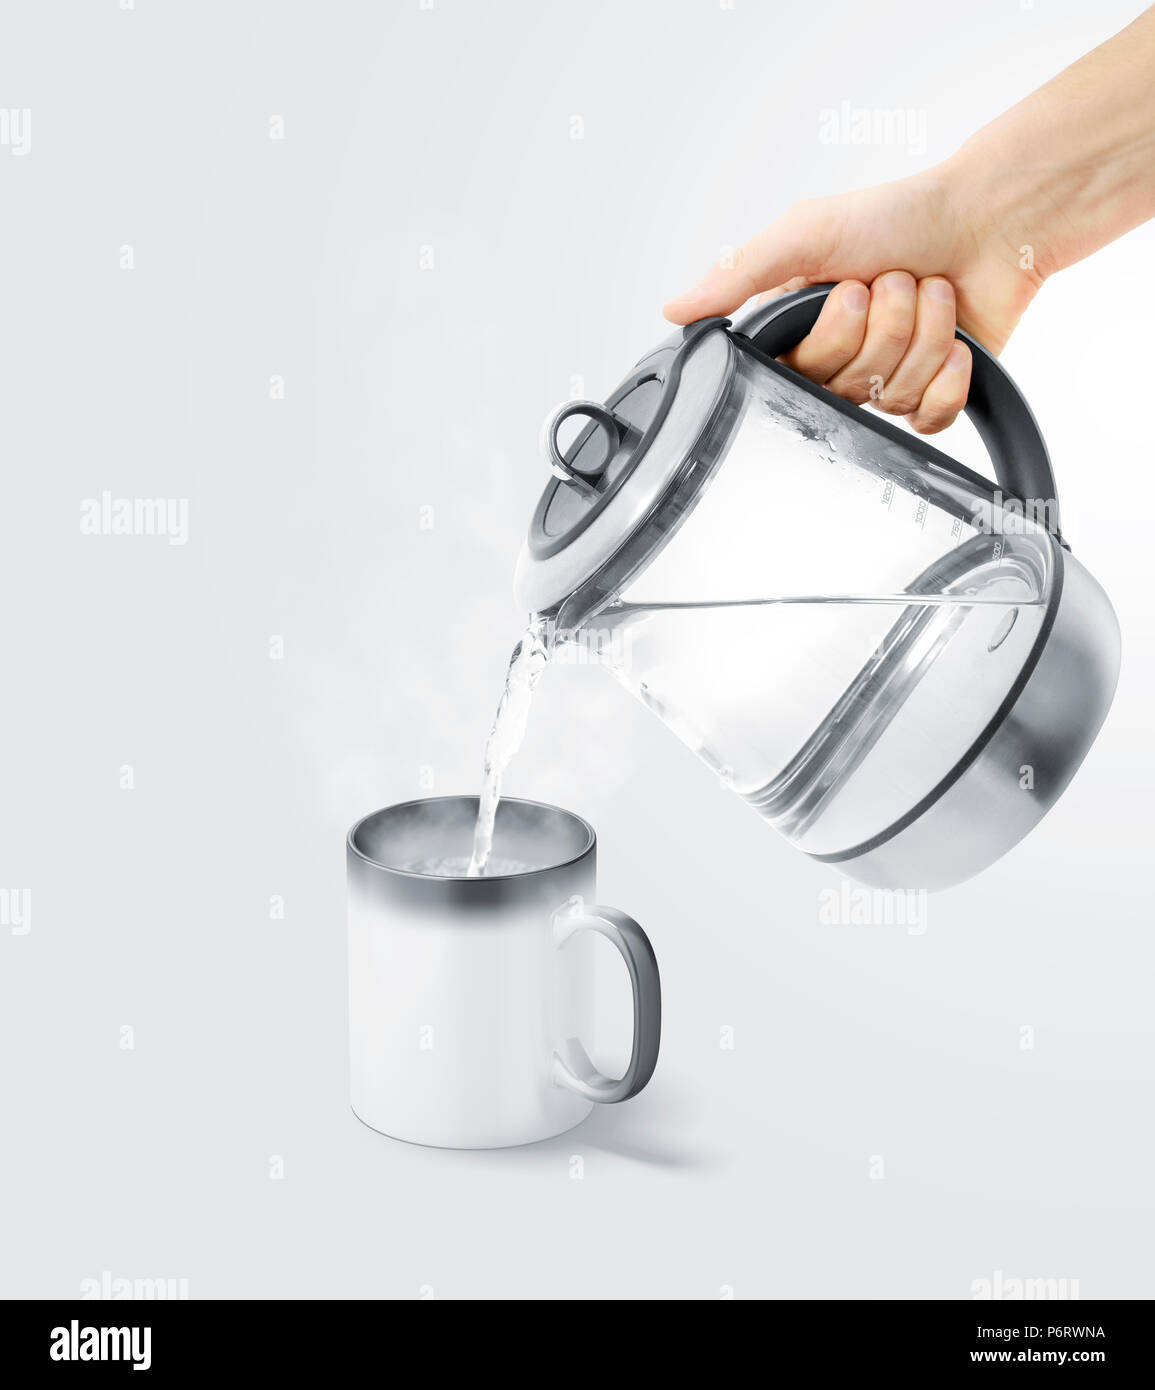 https://c8.alamy.com/comp/P6RWNA/blank-magic-mug-filling-with-boiling-water-mock-up-isolated-magical-heat-sensitive-cup-mockup-color-changing-beverage-utensil-template-morphing-ceramic-with-thermoprint-space-P6RWNA.jpg